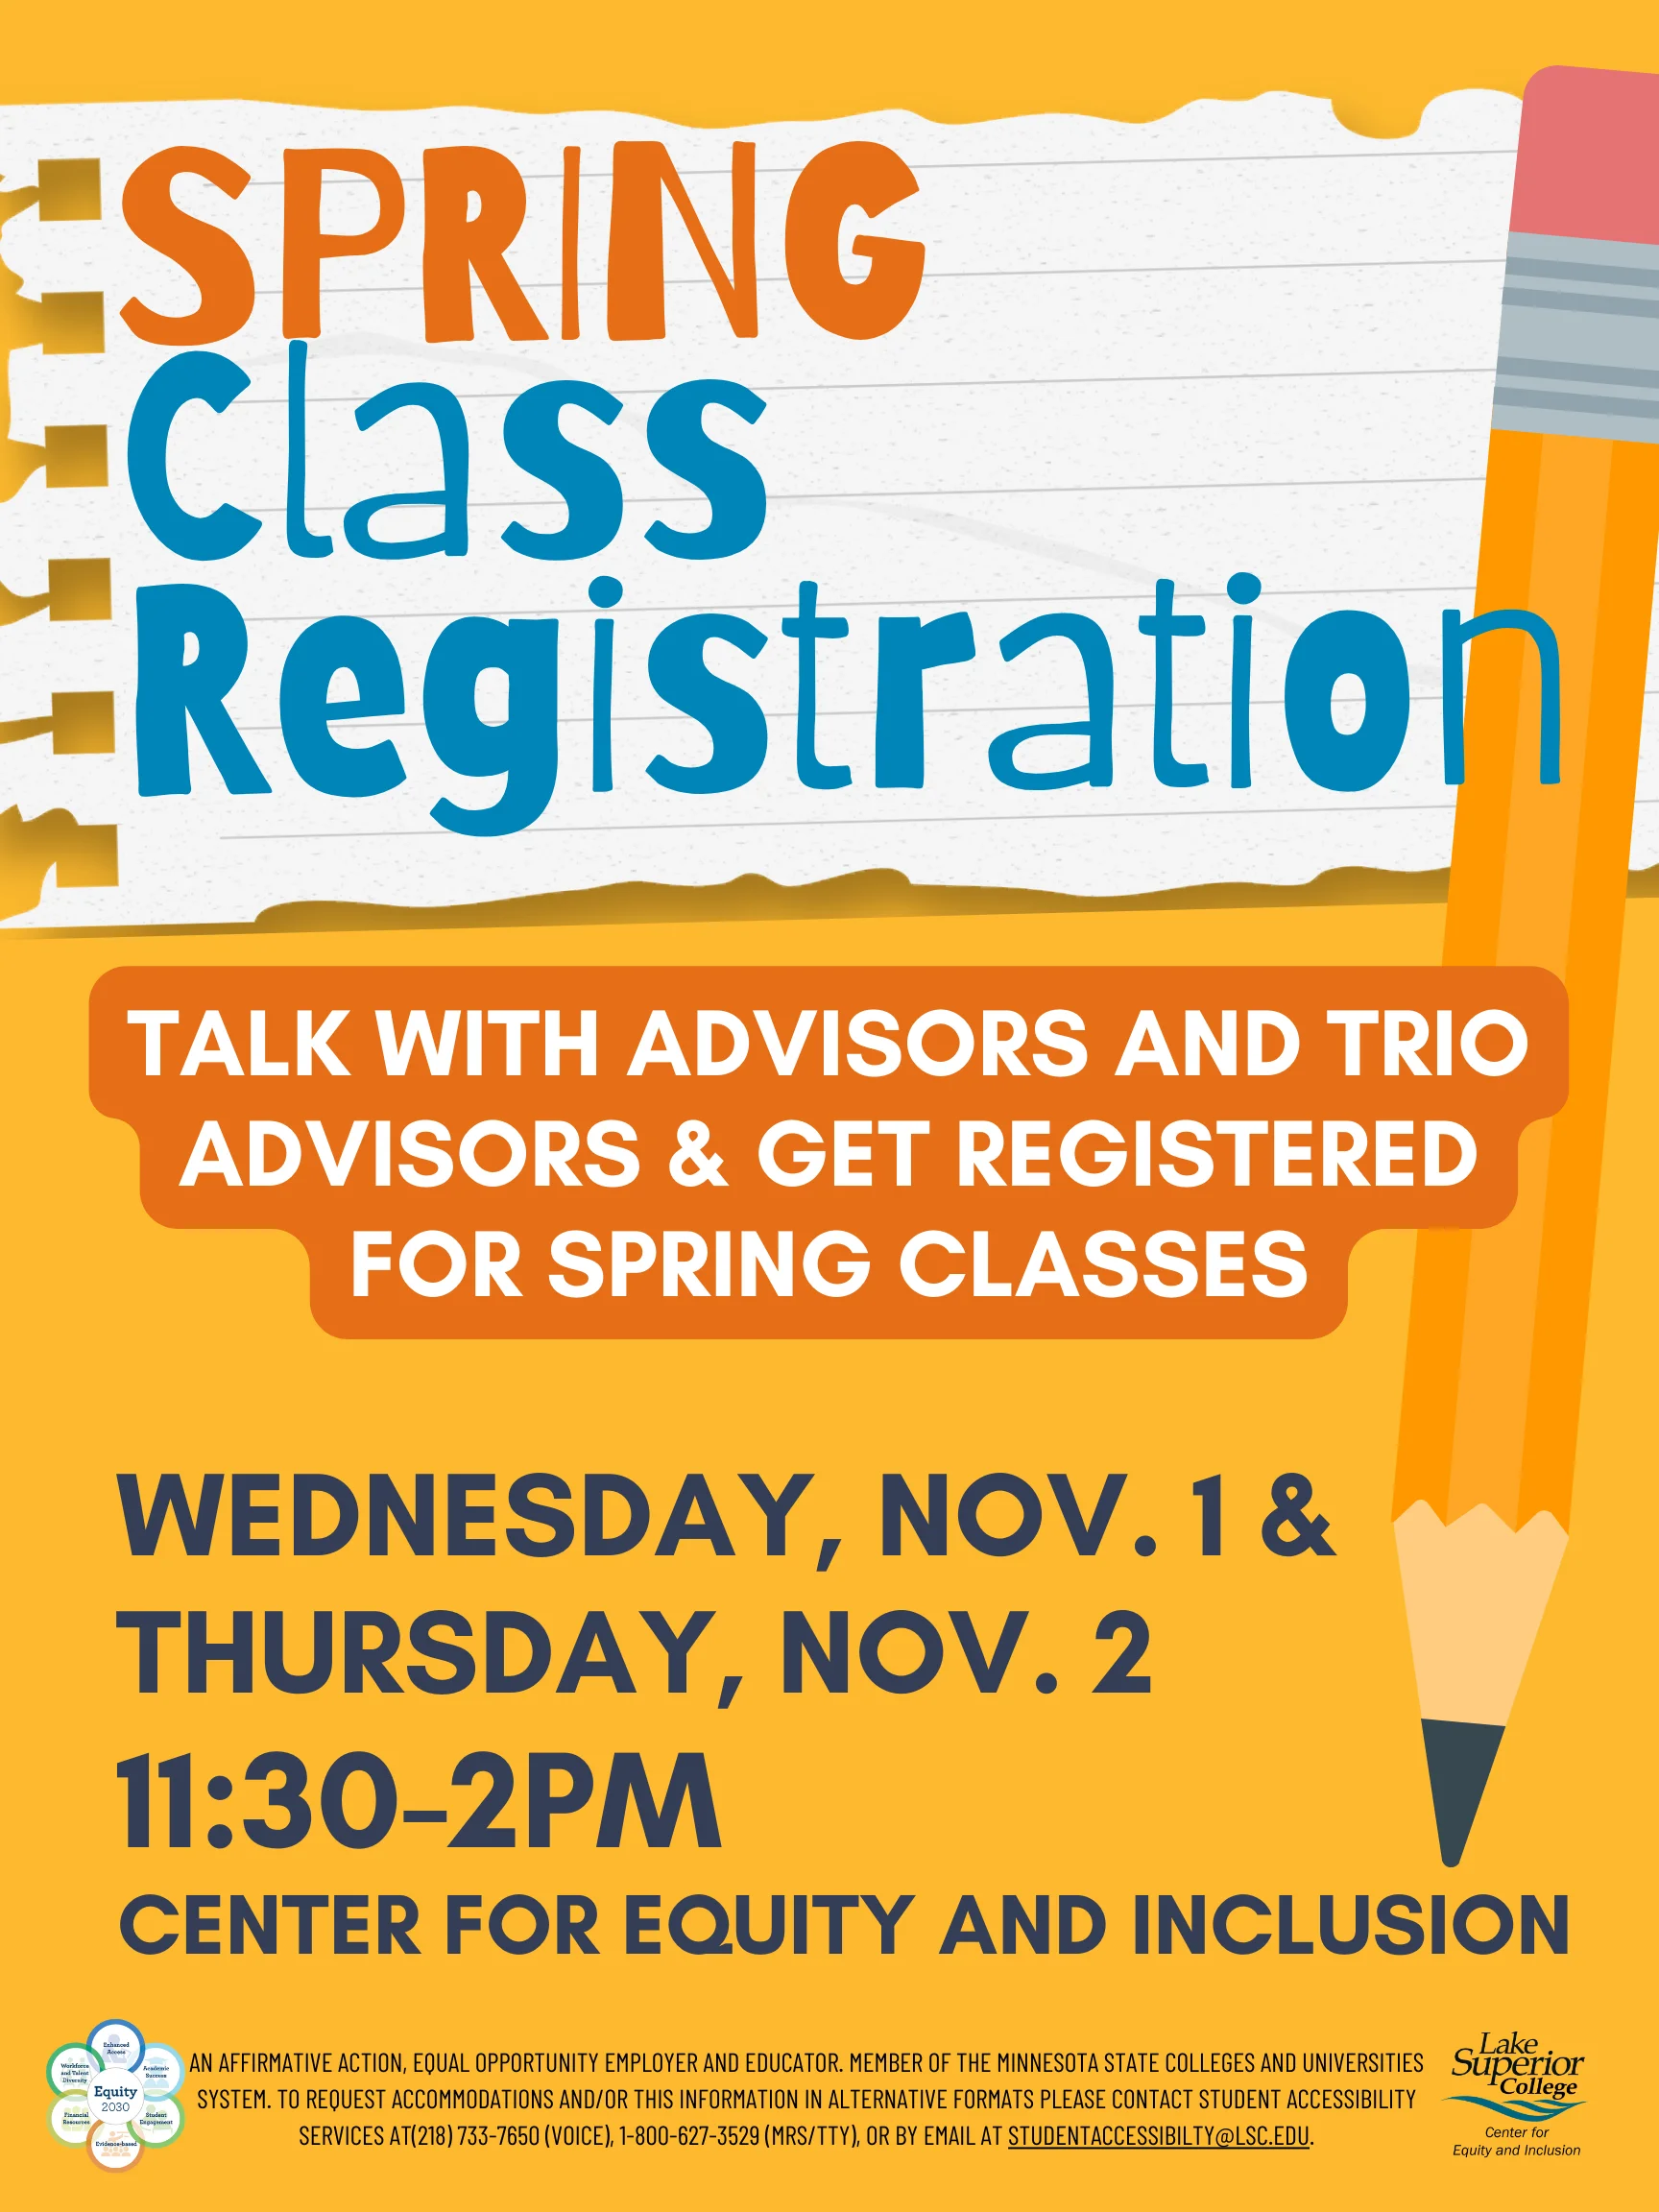 Spring Class Registration in the Center for Equity and Inclusion